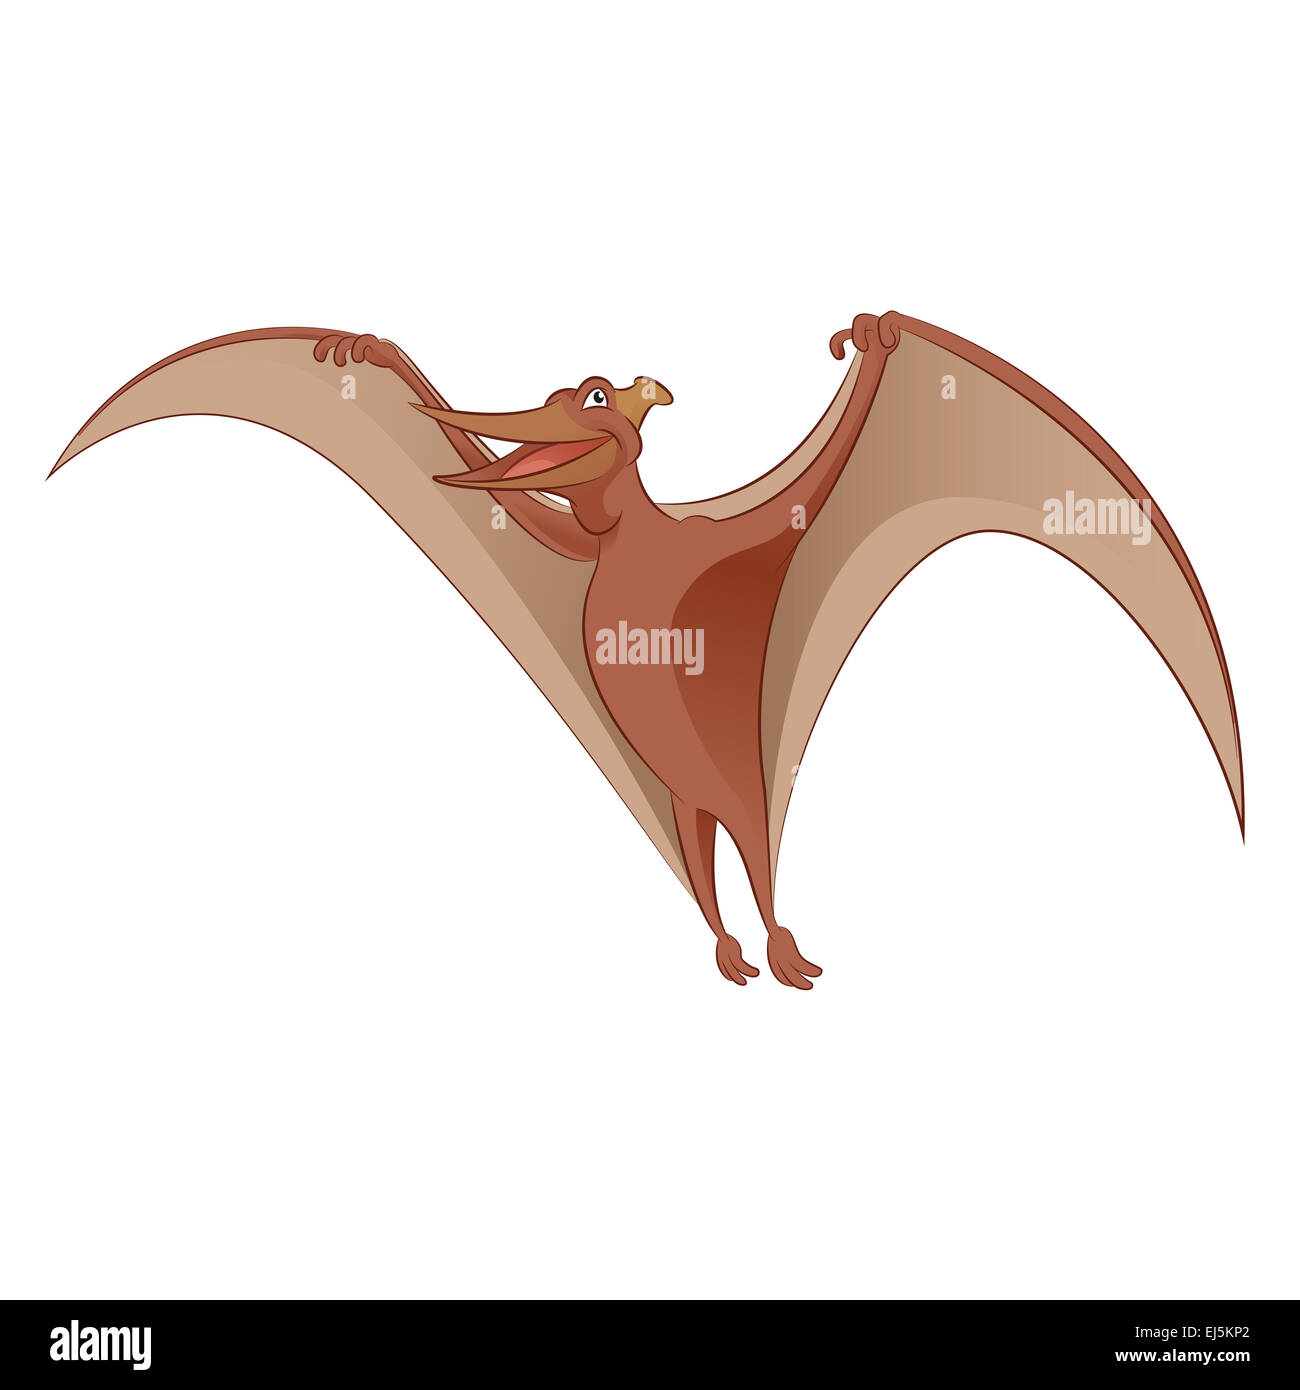 Pterodactyl Png Sublimation Design, Hand Drawn Pterodactyl Png,Pterodactyl  Portrait Png,Dinosaur Png,Dinosaur Portrait Png Digital Downloads